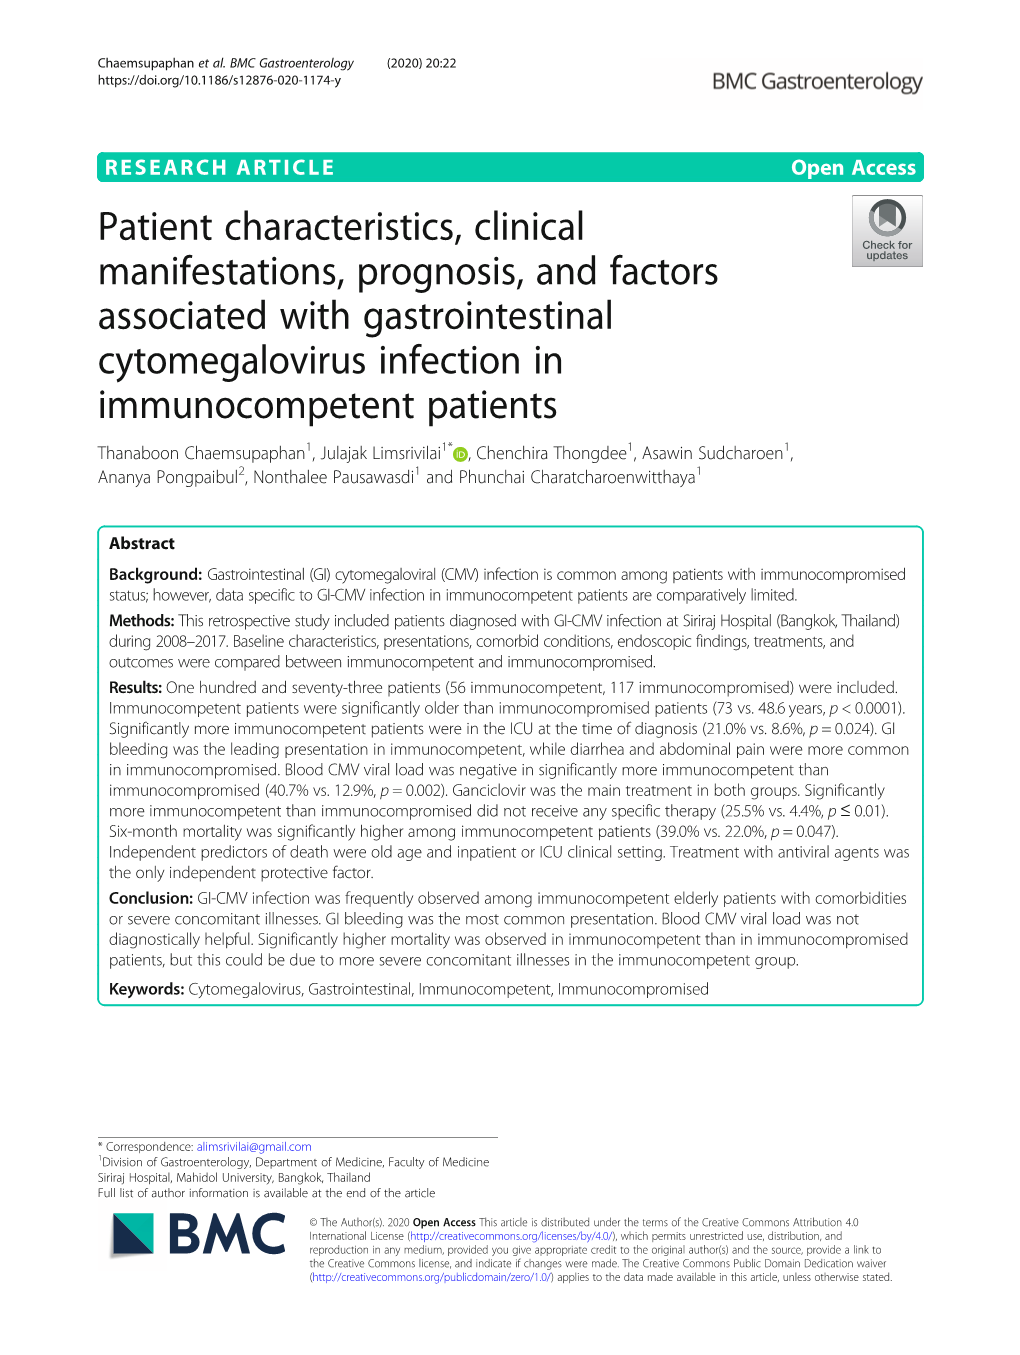 Patient Characteristics, Clinical Manifestations, Prognosis, And